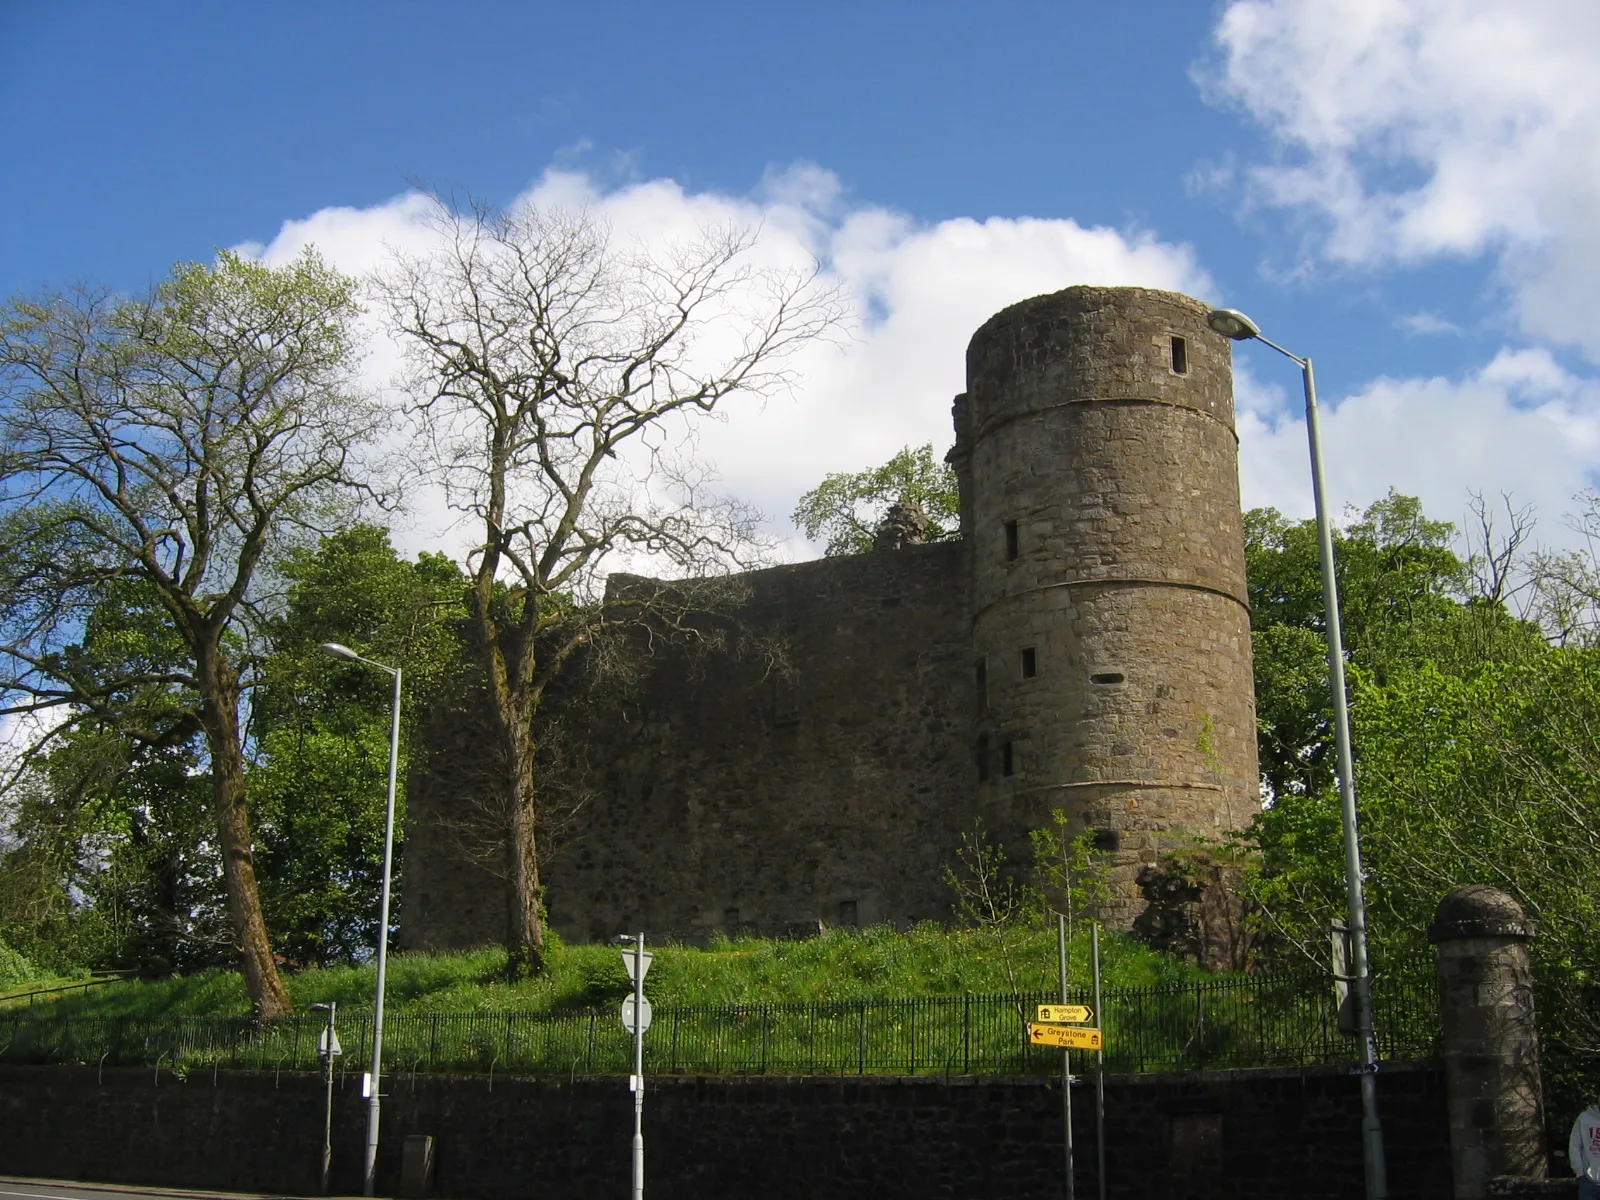 Photo showing: Strathaven Castle, in Strathaven, South Lanarkshire, Scotland.

Taken by Supergolden, 27th May 2006.